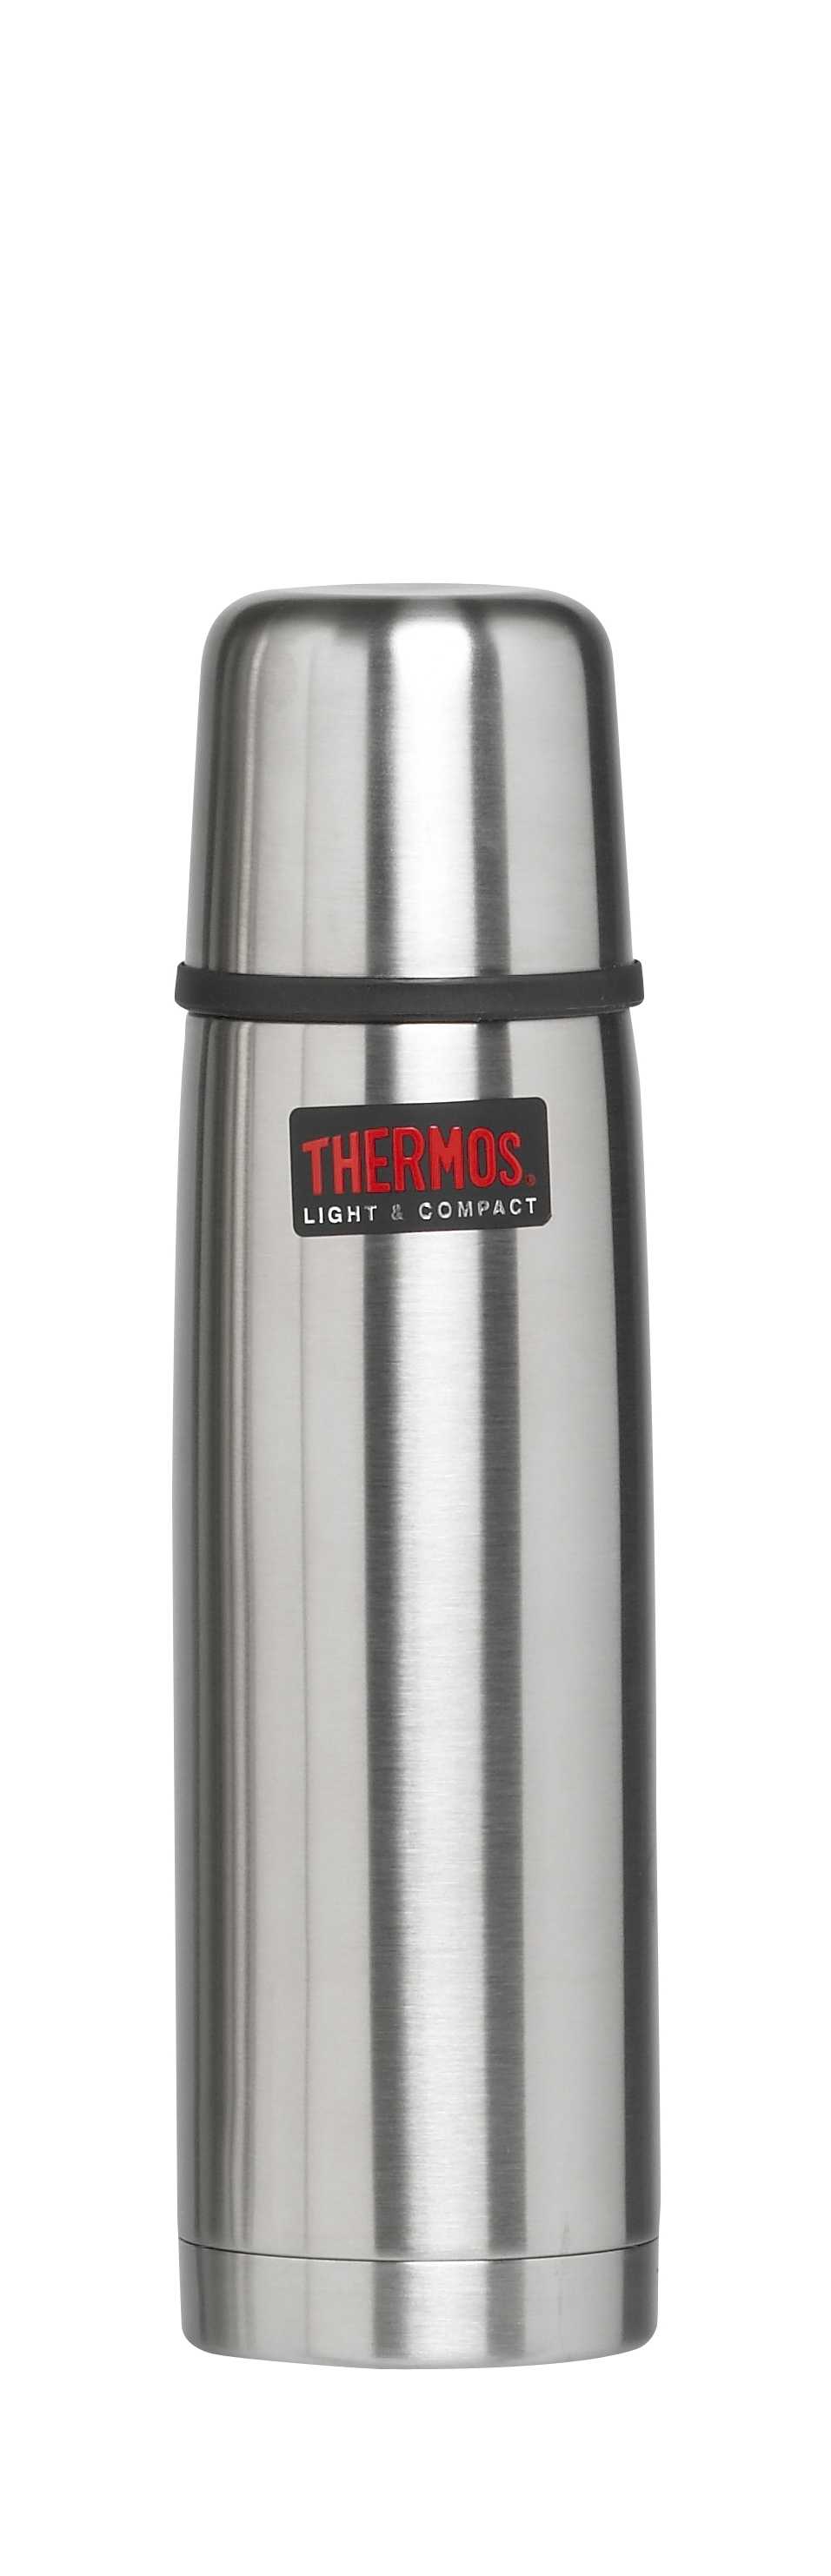 Thermos Isolierflasche Light & Compact 0,35 L, edelstahl